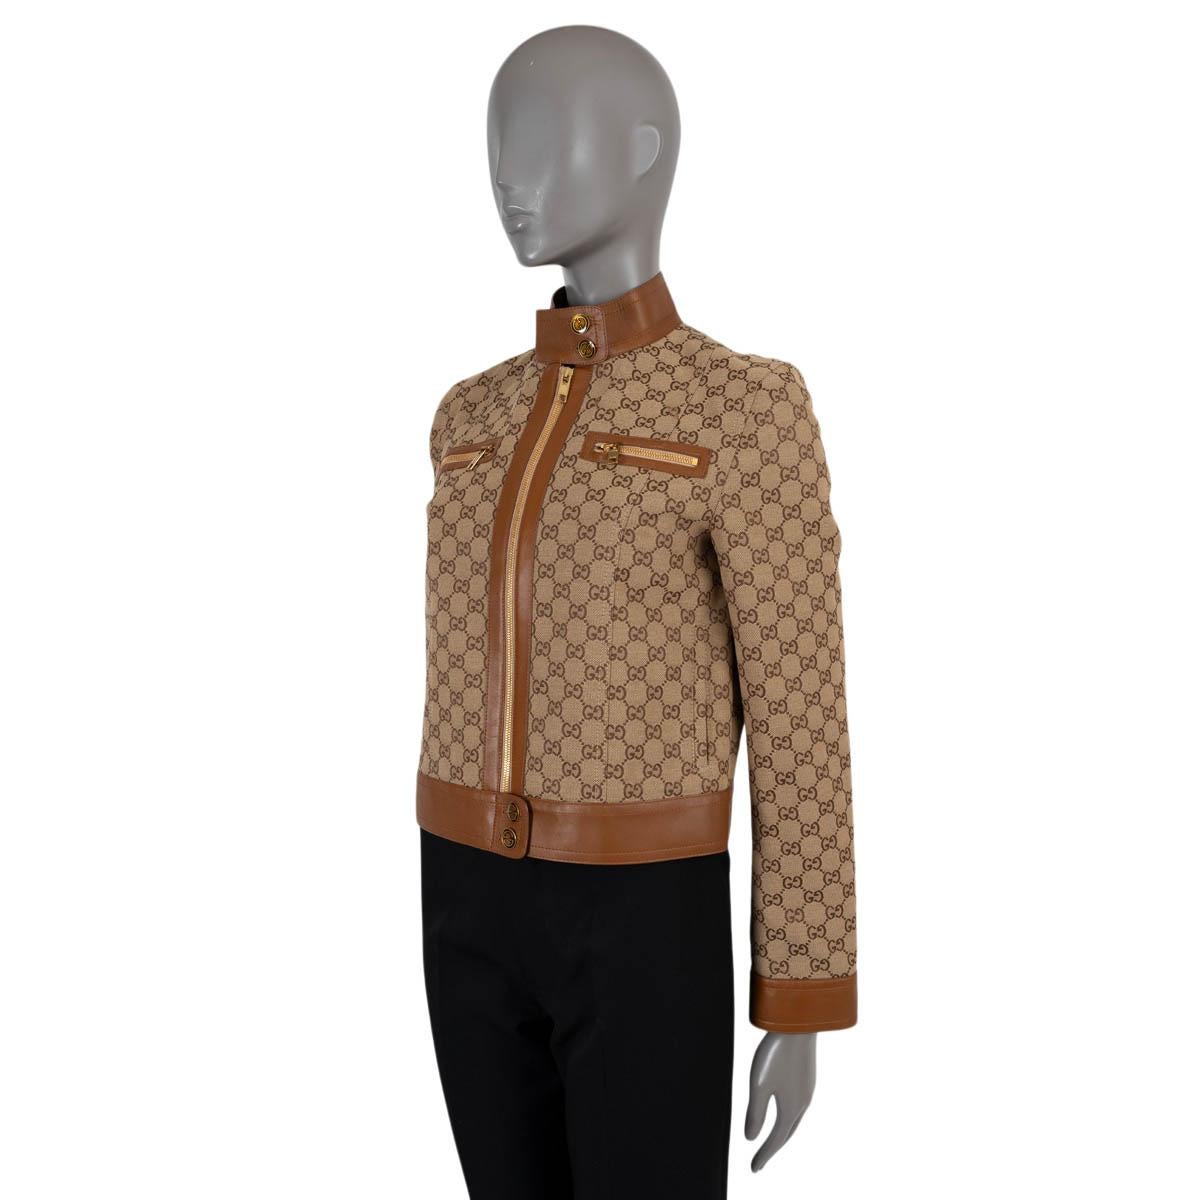 100% authentic Gucci jacket in beige and ebony GG monogram jacquard cotton (70%) and polyester (30%). Features cognac brown leather trims, band collar with snap buttons, zipper chest pockets and buttoned zipper cuffs. Closes with a zipper and